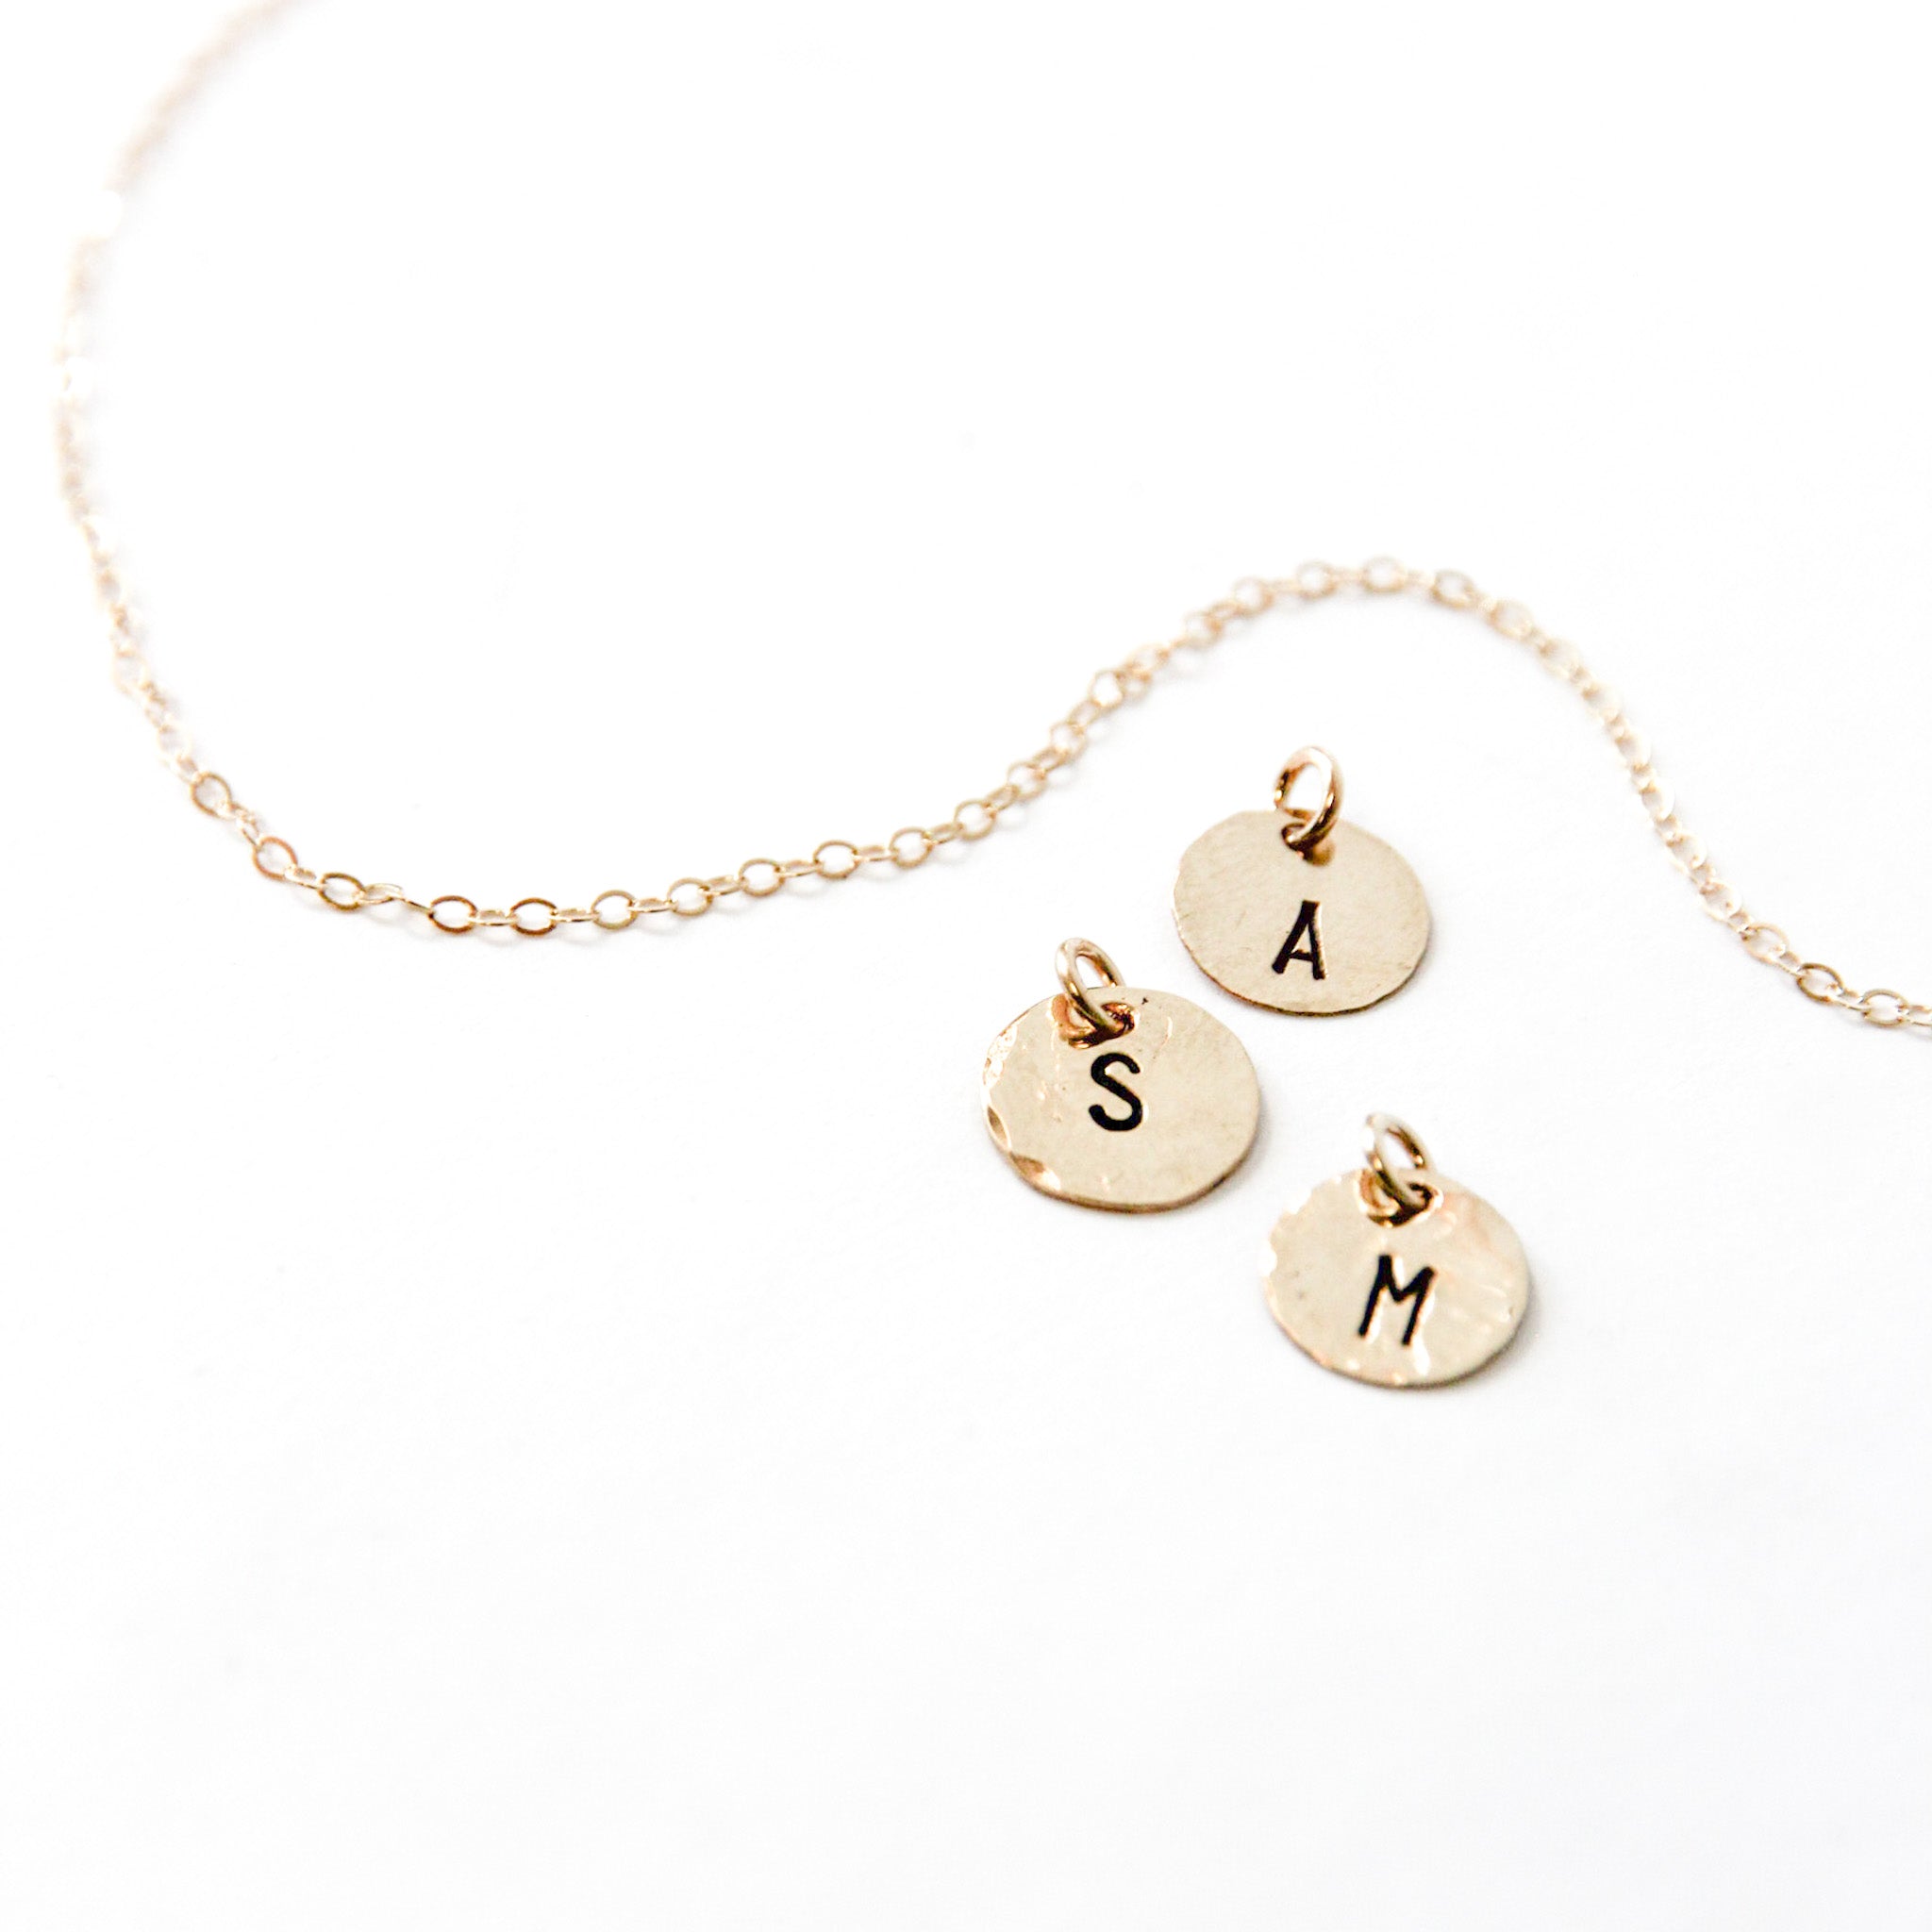 3 gold charms about the size of a dime with a gold chain